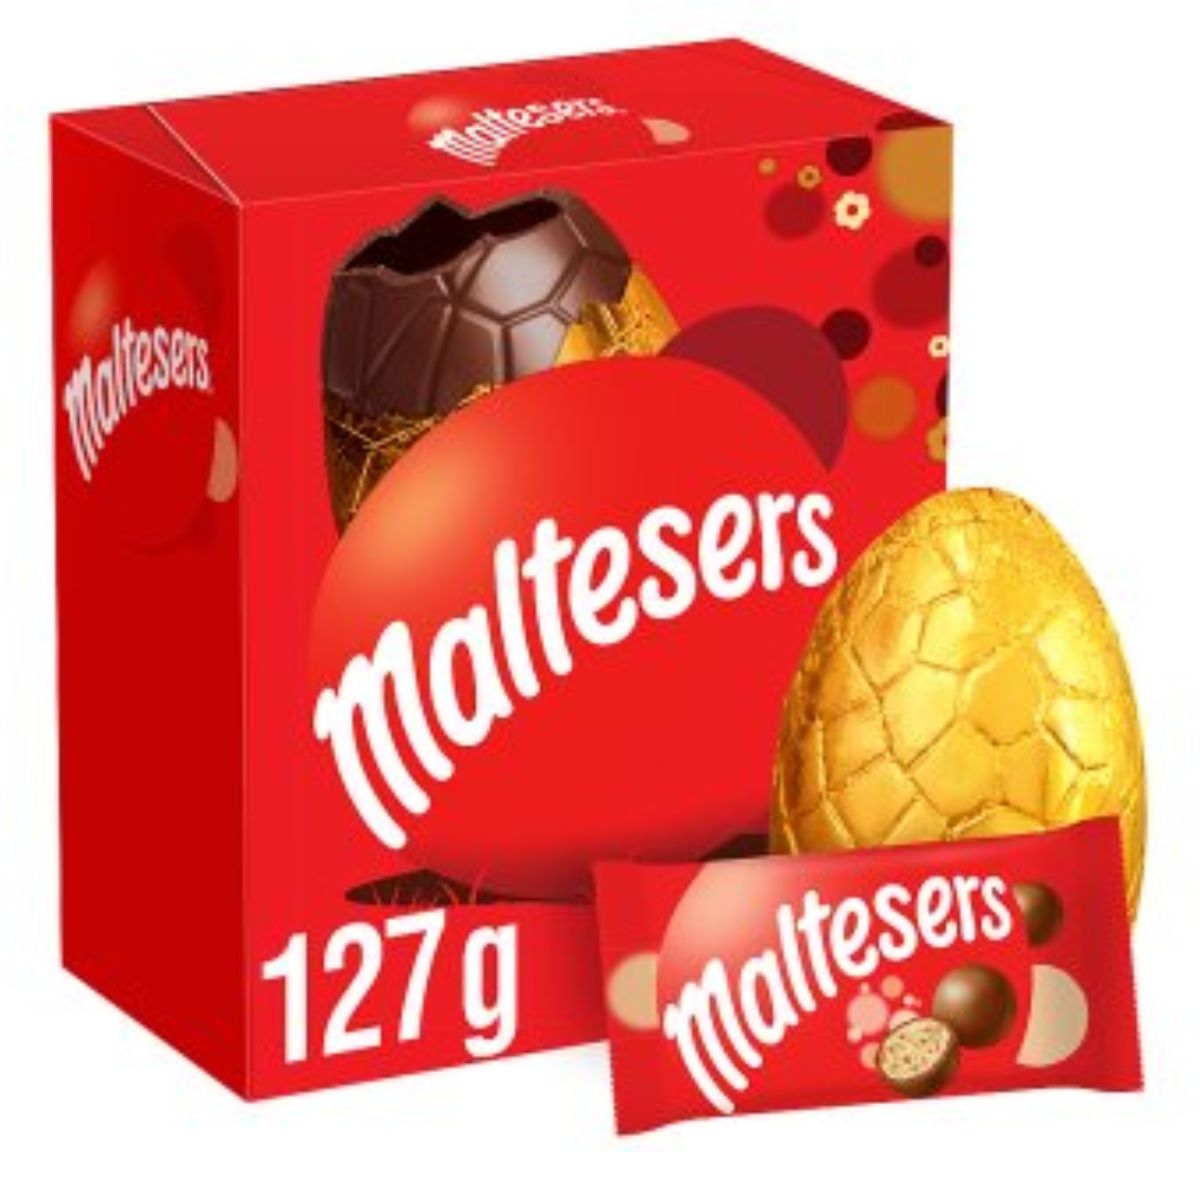 A Maltesers - Milk Chocolate Medium Easter Egg - 127g in front of a box.